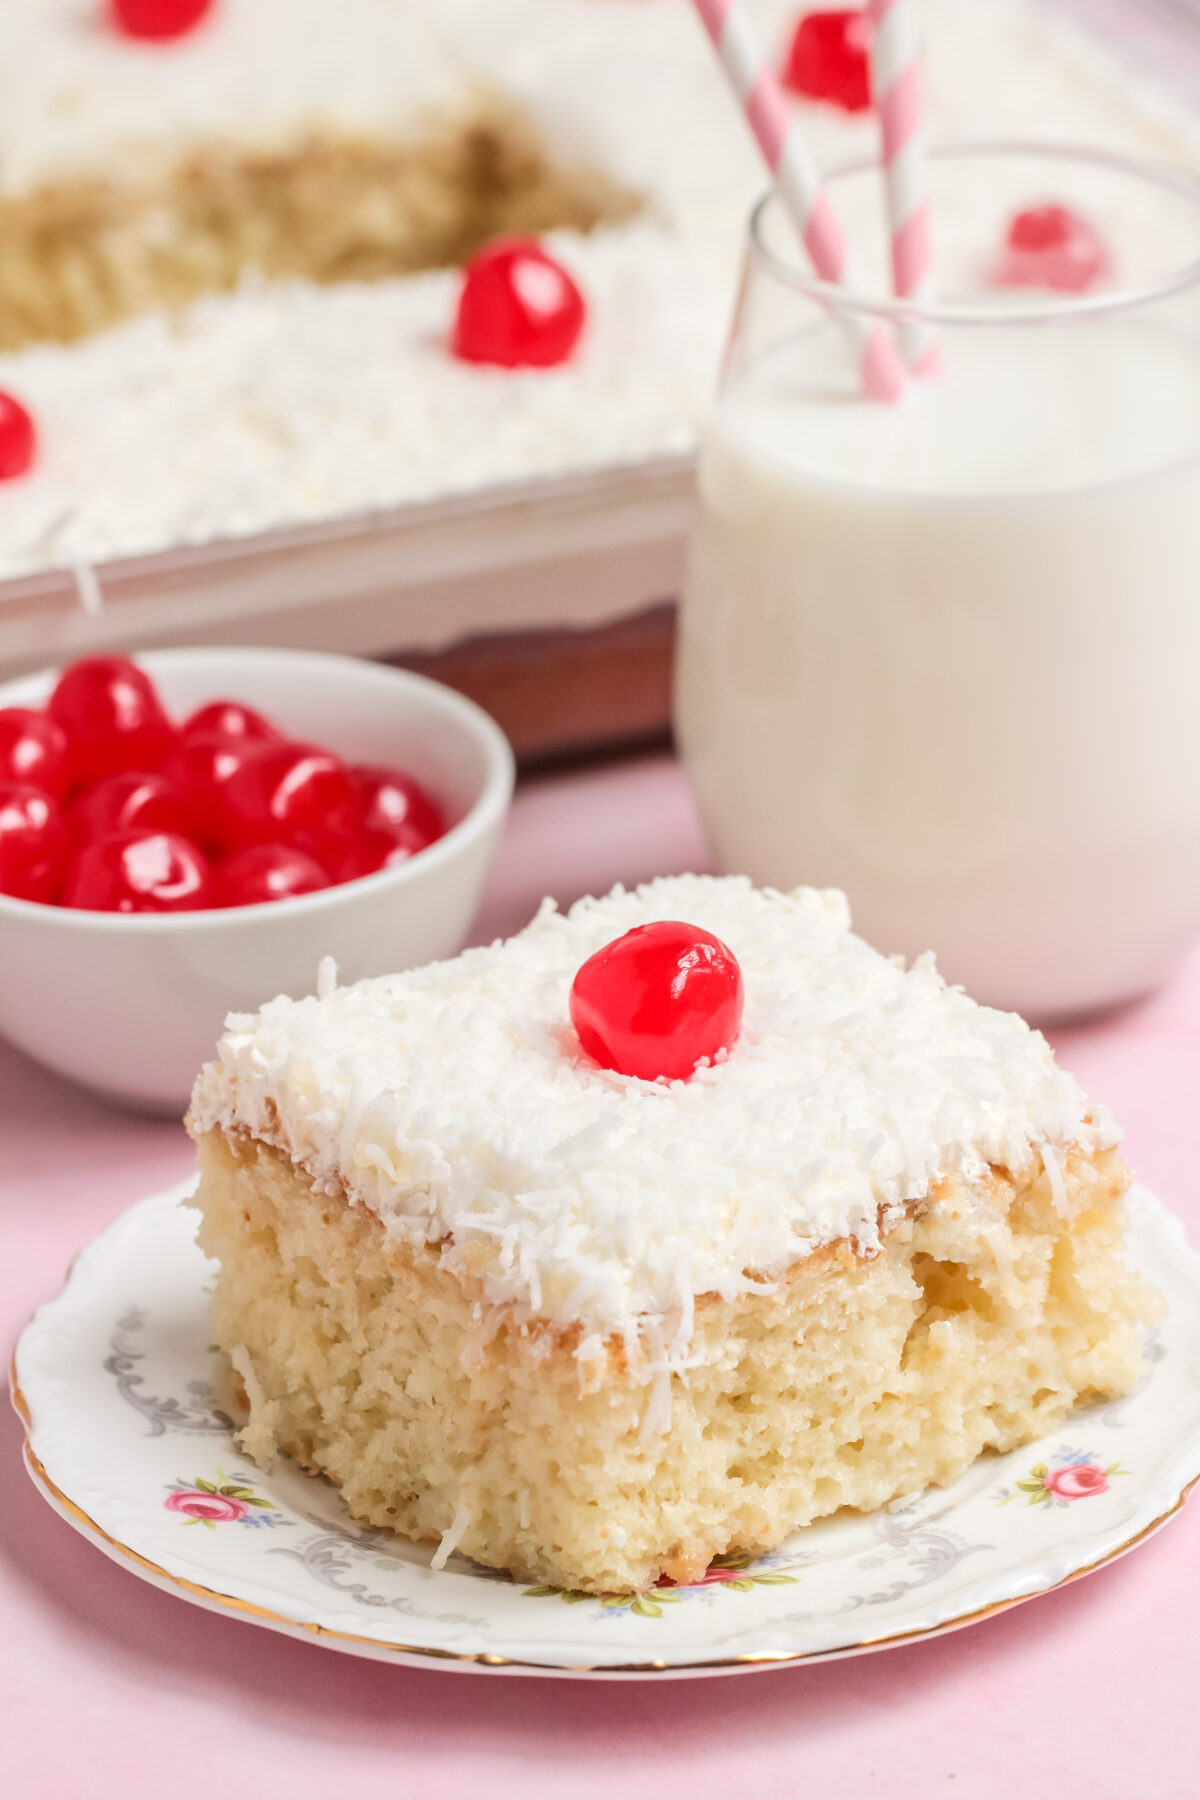 A delicious coconut poke cake recipe that is perfect for any occasion! This easy poke cake is made with coconut milk and shredded coconut.